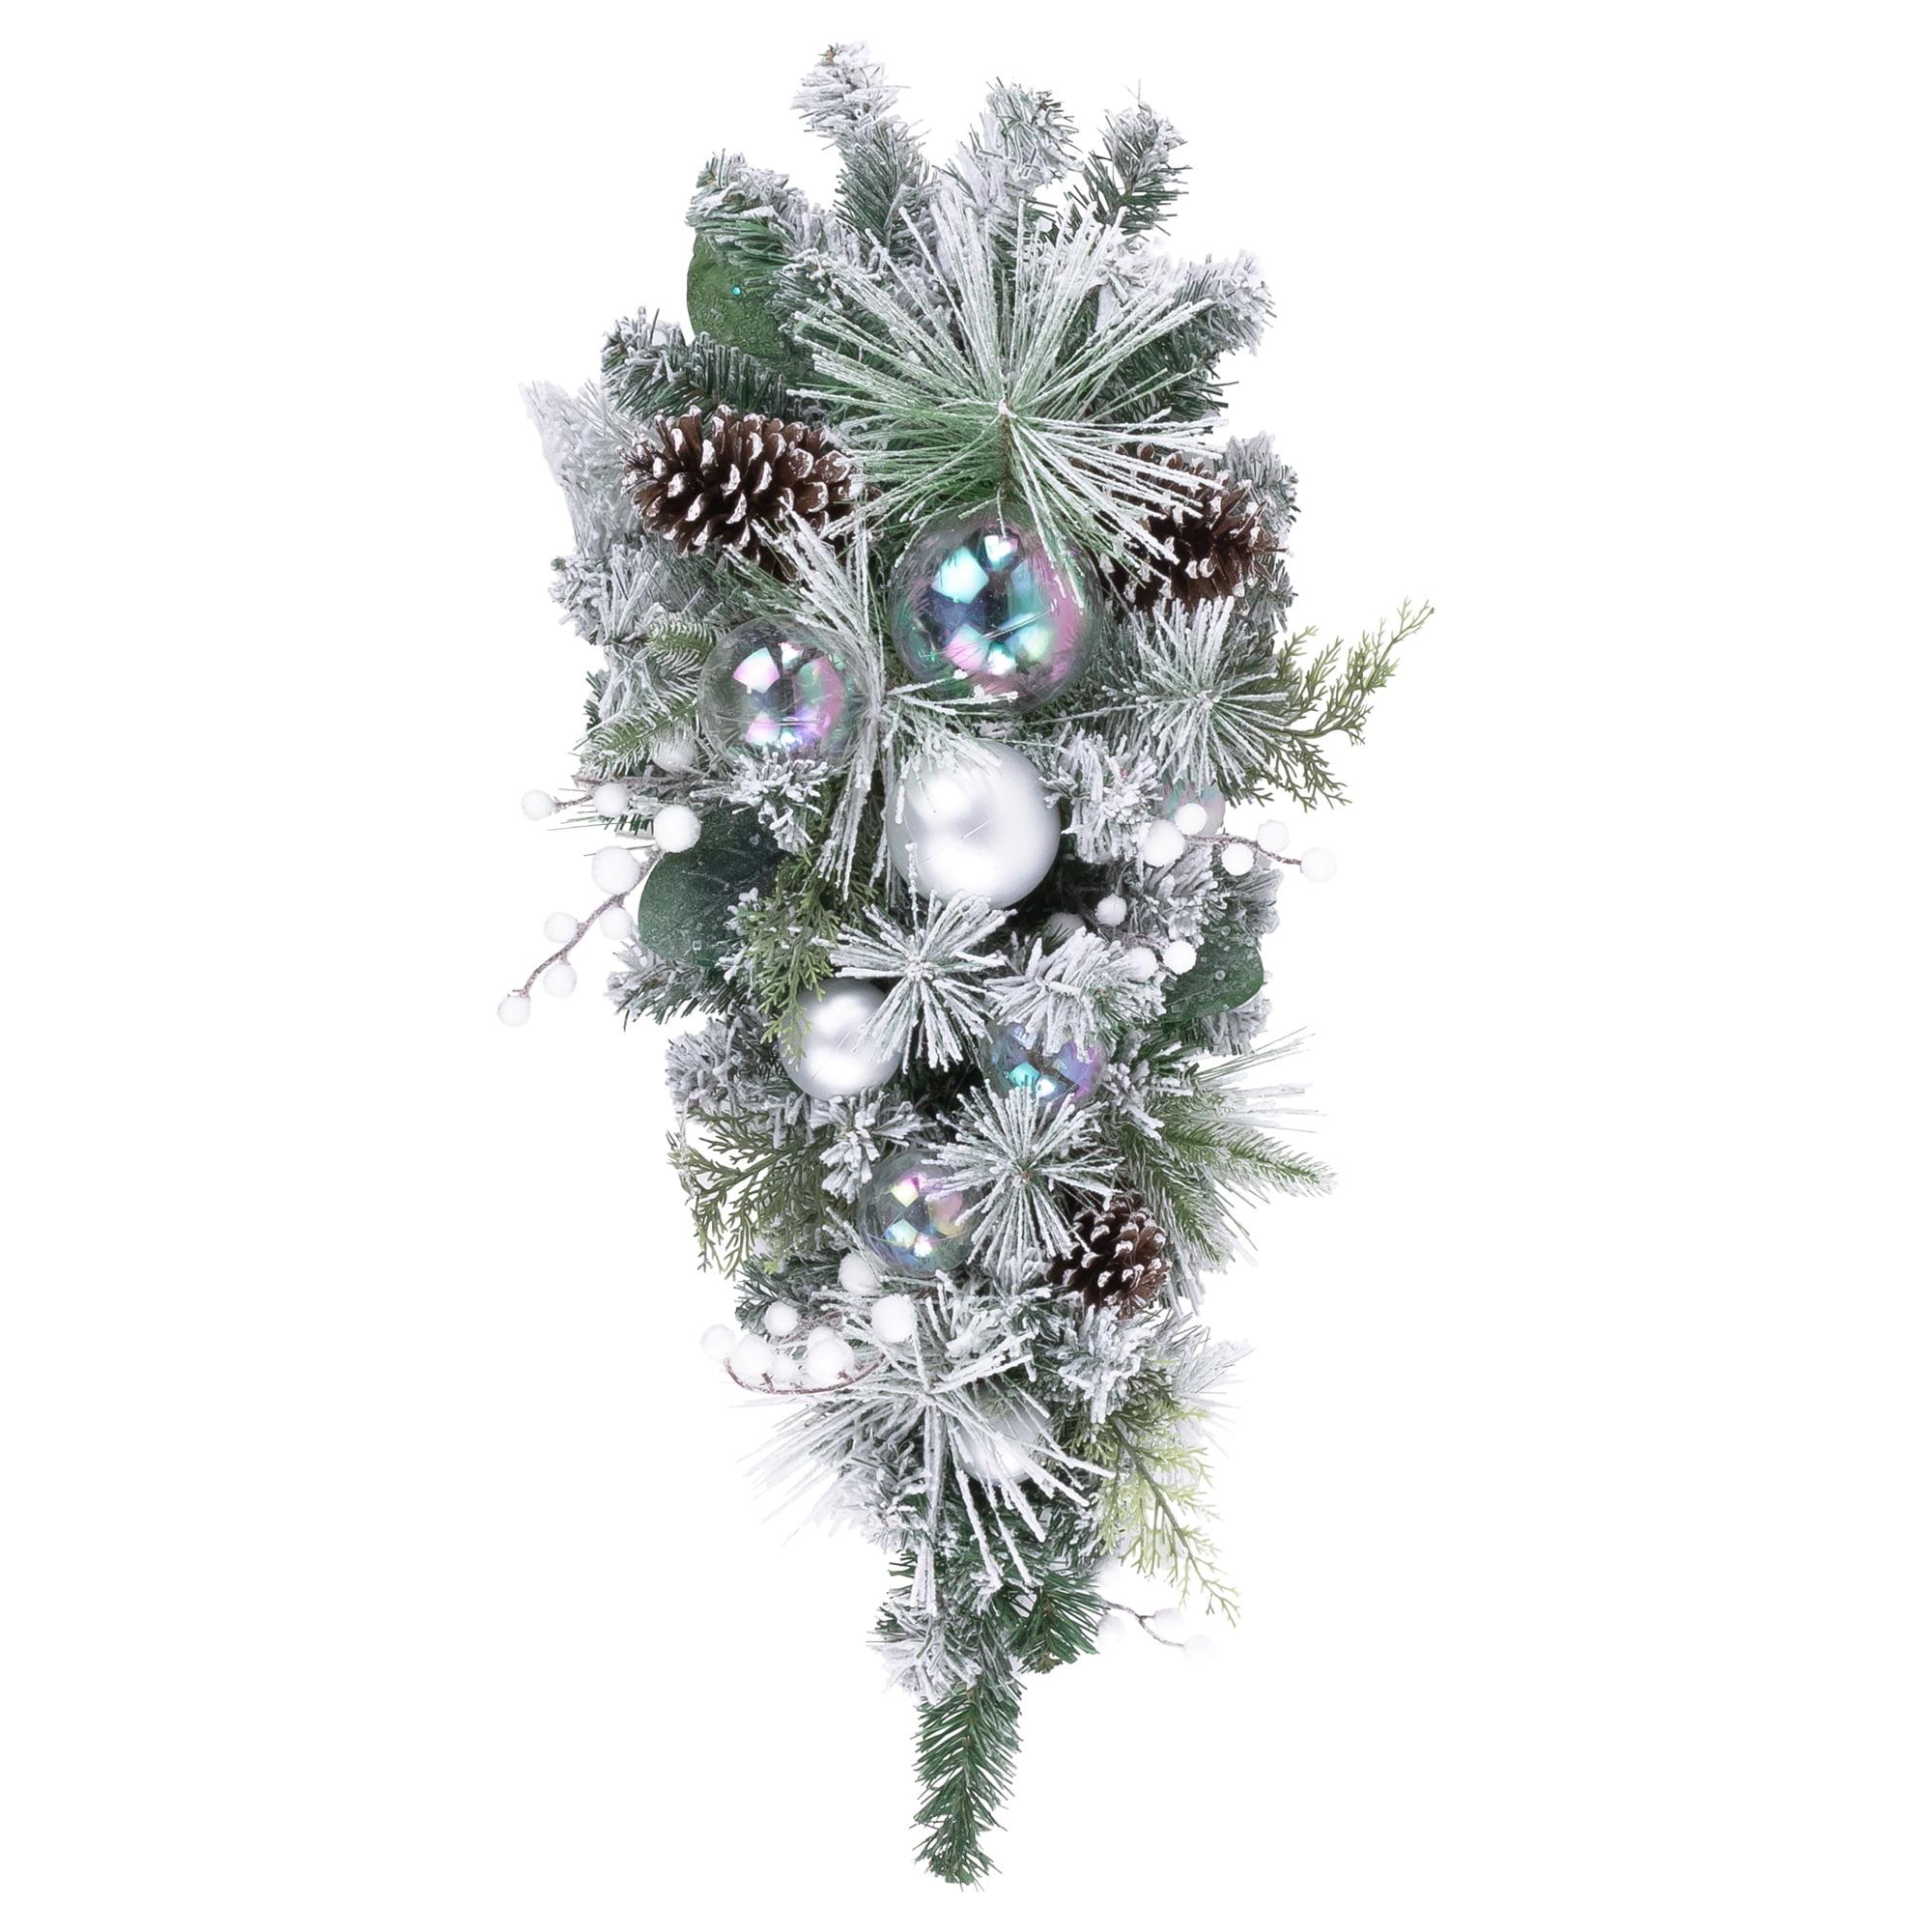 30" Flocked Pine Unlit Christmas Teardrop Swag with Iridescent Ornaments